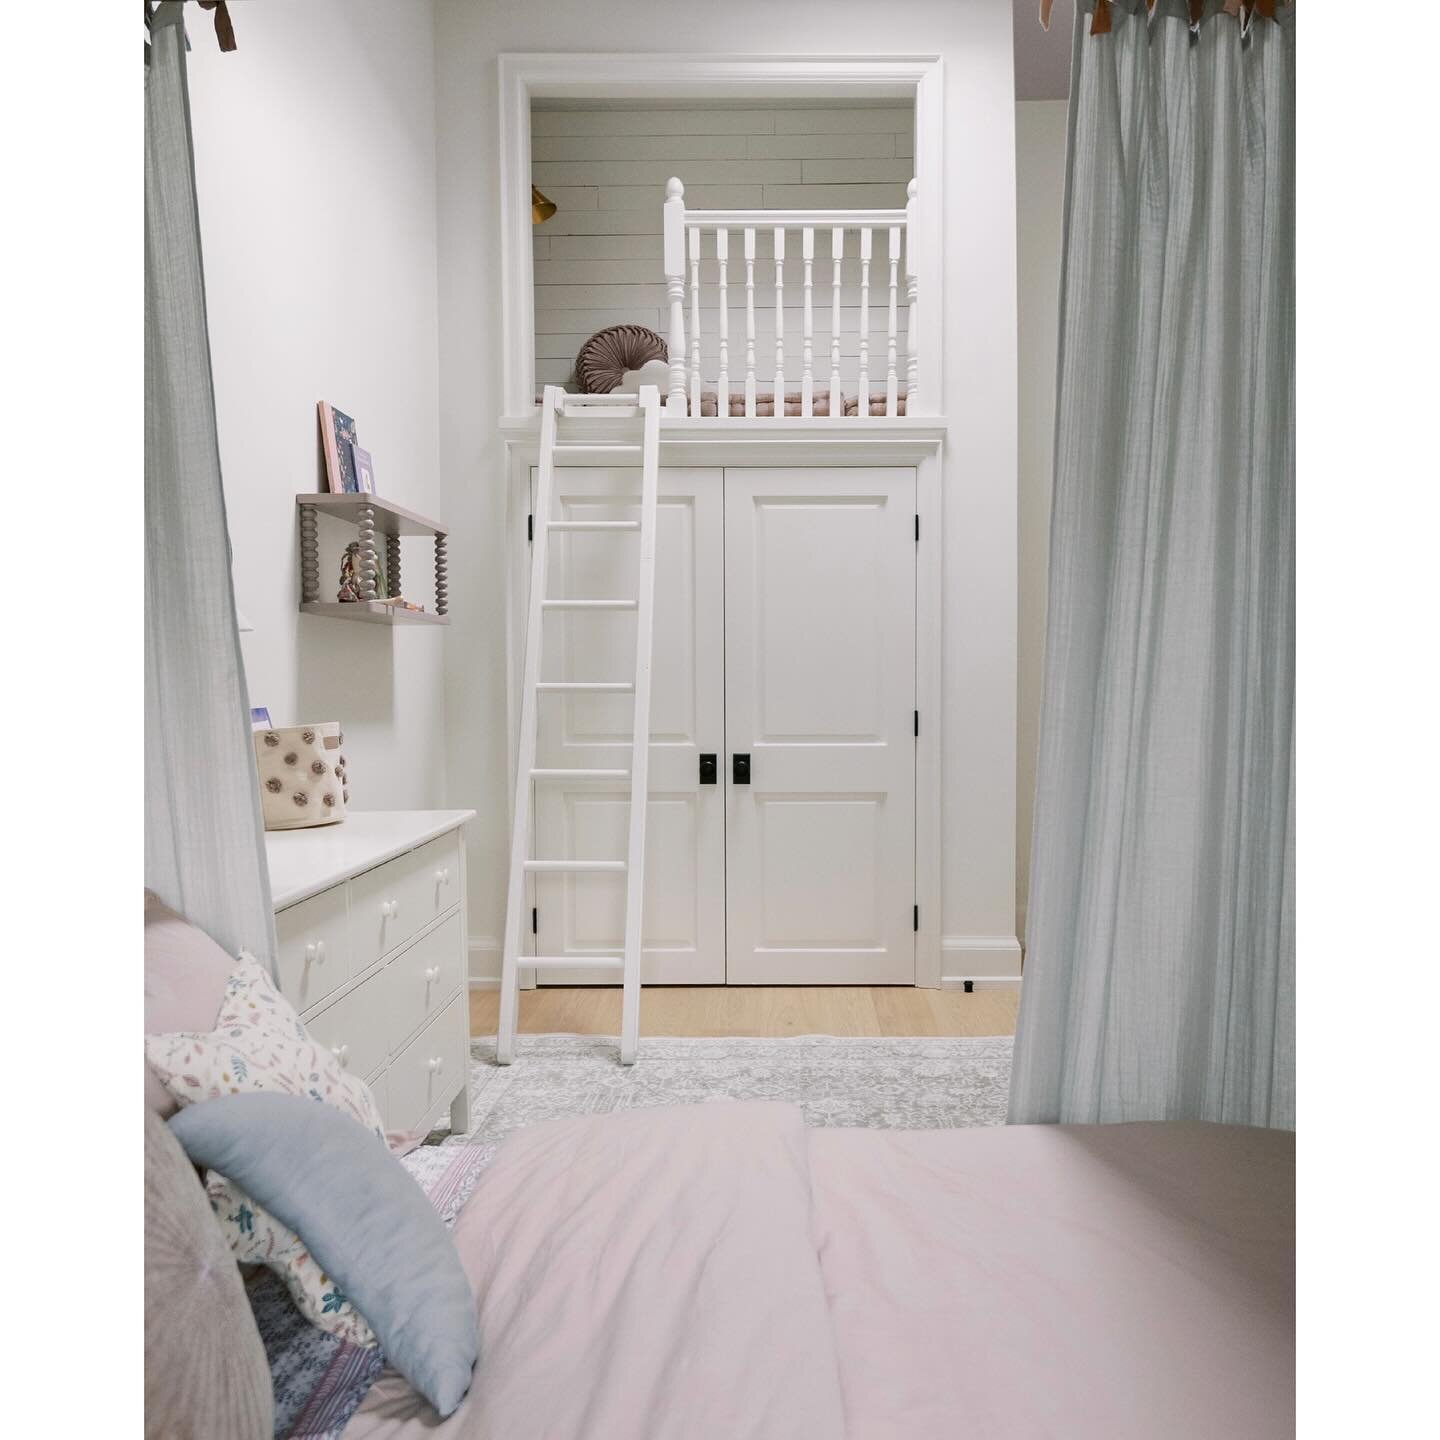 Coming soon&hellip; the coolest tween room with a secret hangout nook. After my initial site consult, I instantly knew the storage cupboards above the closet had to be transformed into a reading and hangout nook. All it took was a clear vision and a 